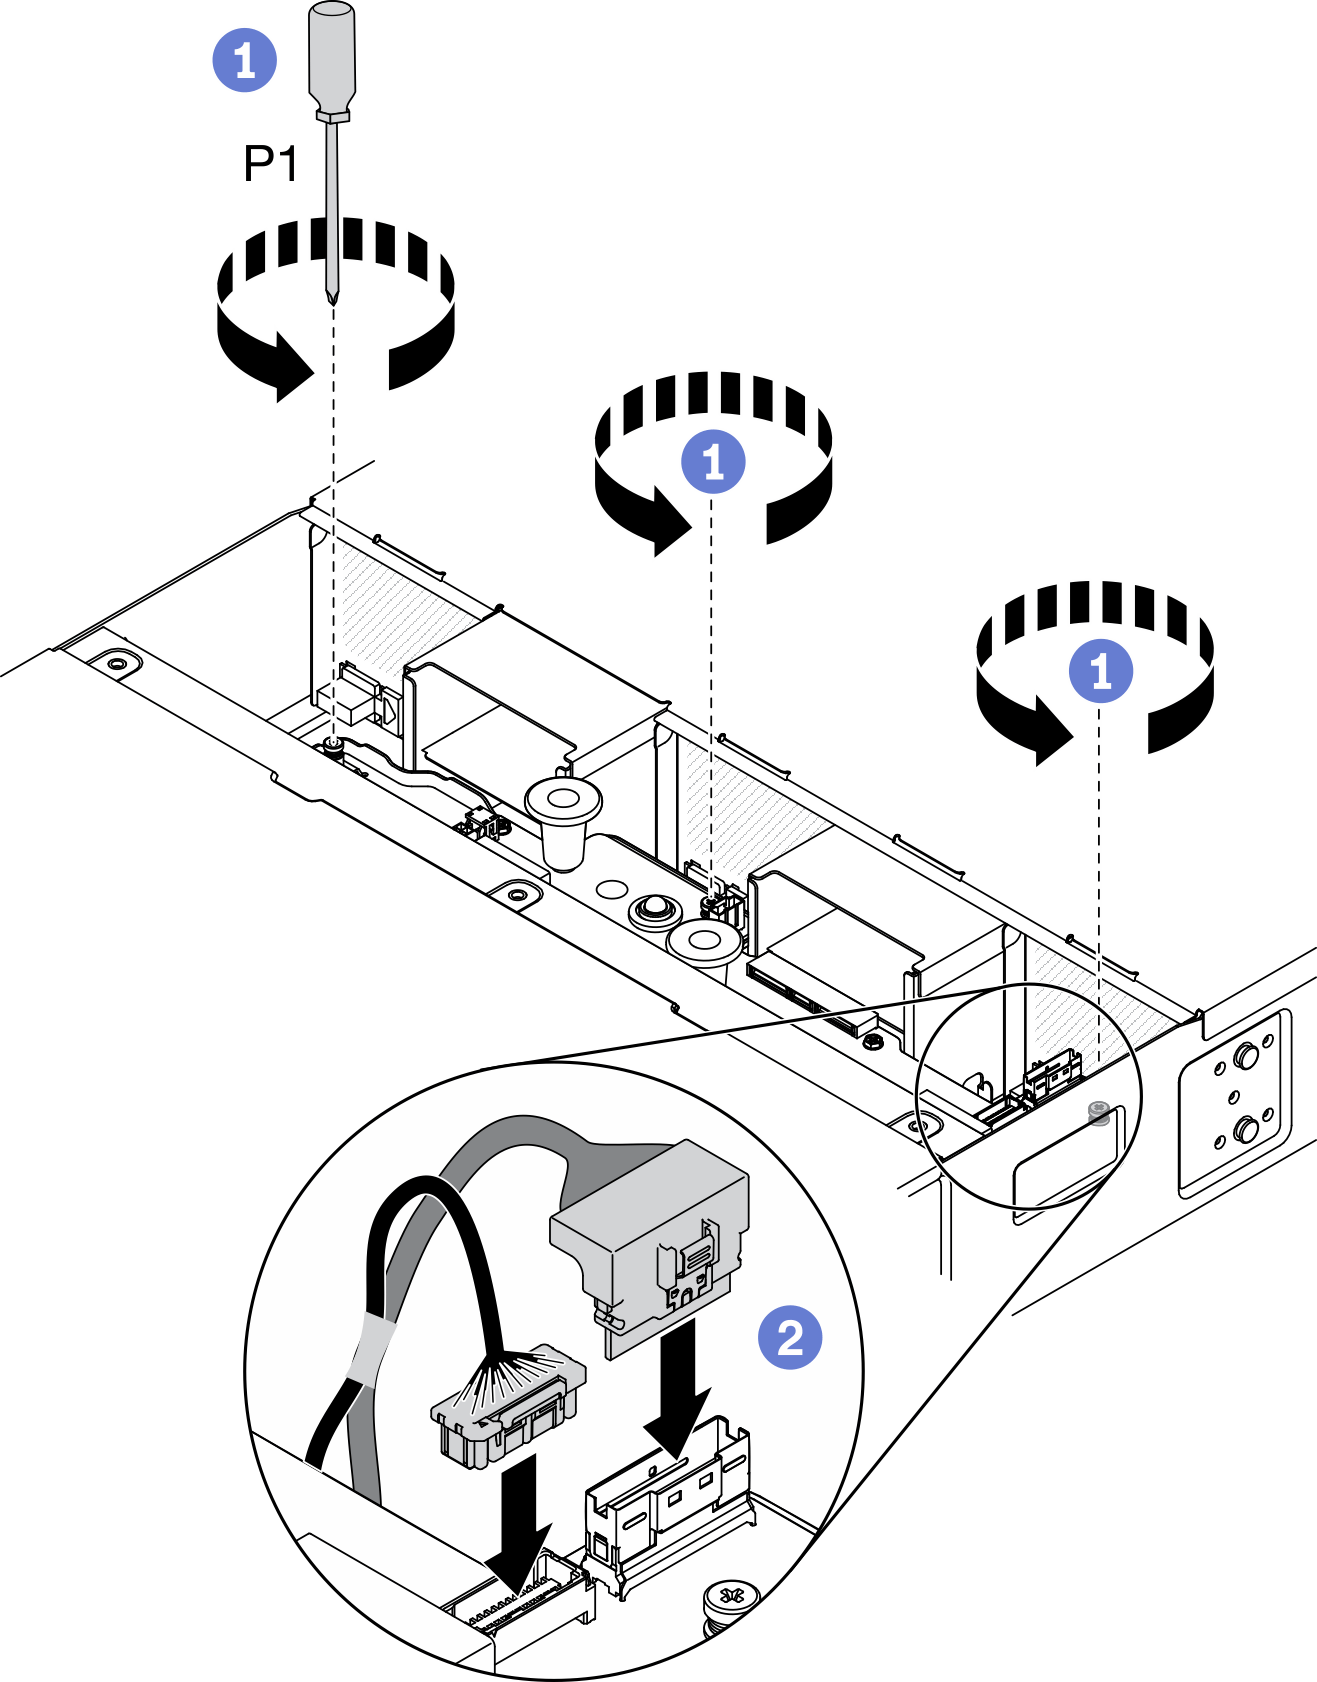 Connecting interconnect cables for power distribution boards